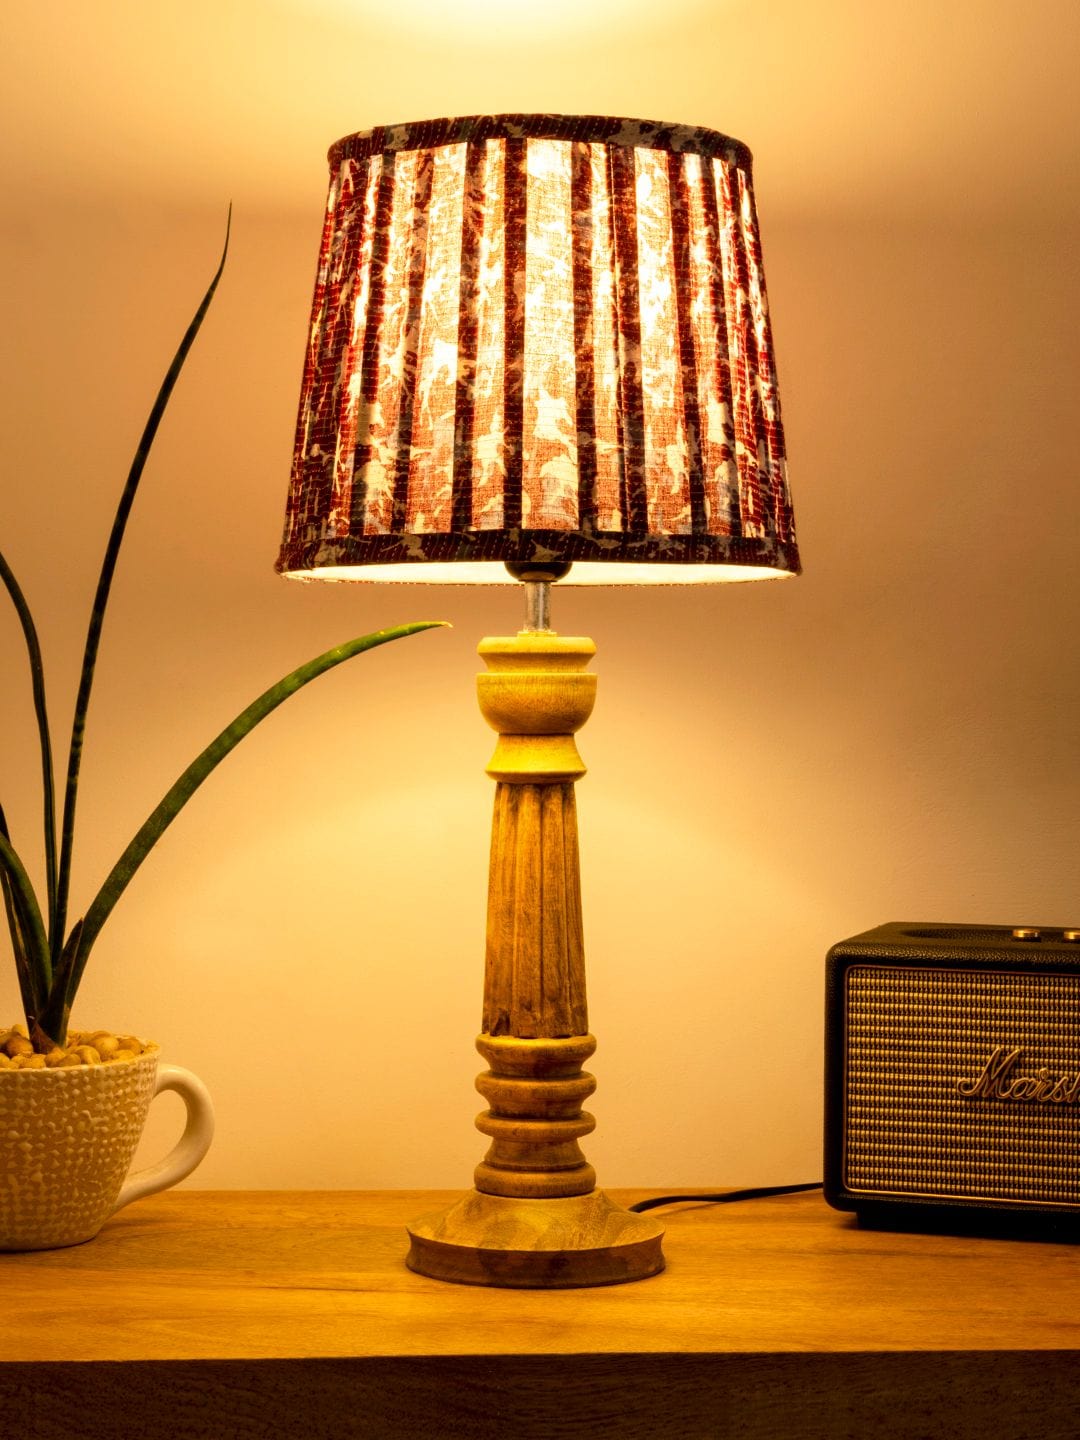 Wooden Pillar Brown lamp with pleeted Colorful Soft Shade